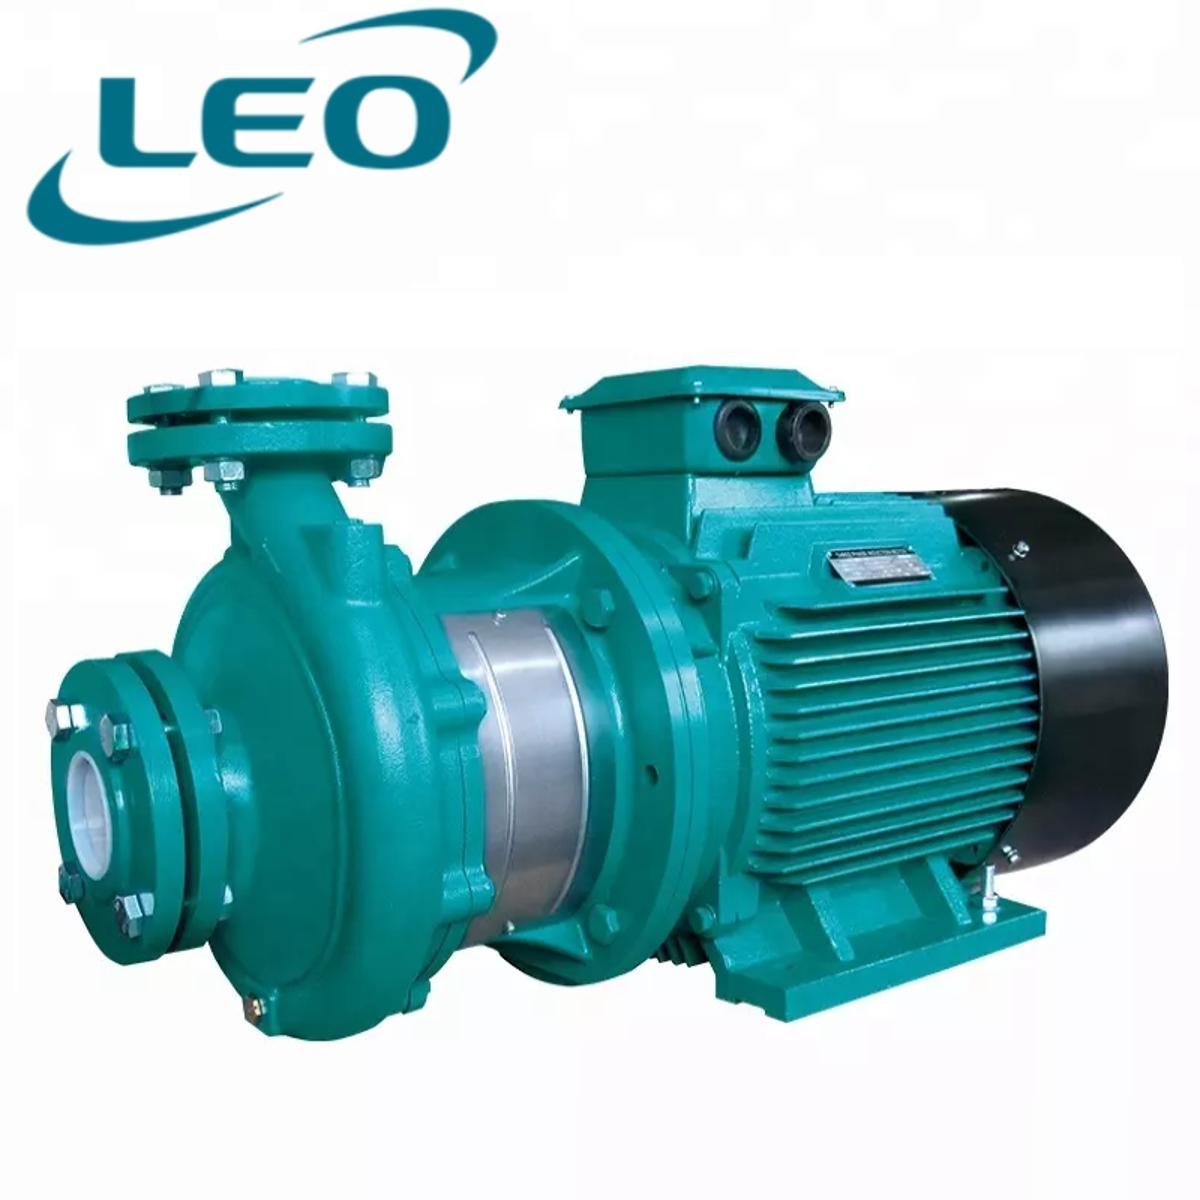 LEO - XST-50-250-185 - 18500 W - 25 HP - Clean Water HEAVY DUTY Centrifugal Pump With FLANGES  - 380V~400V THREE PHASE - SIZE :- 2 1-2" x 2 " - European STANDARD